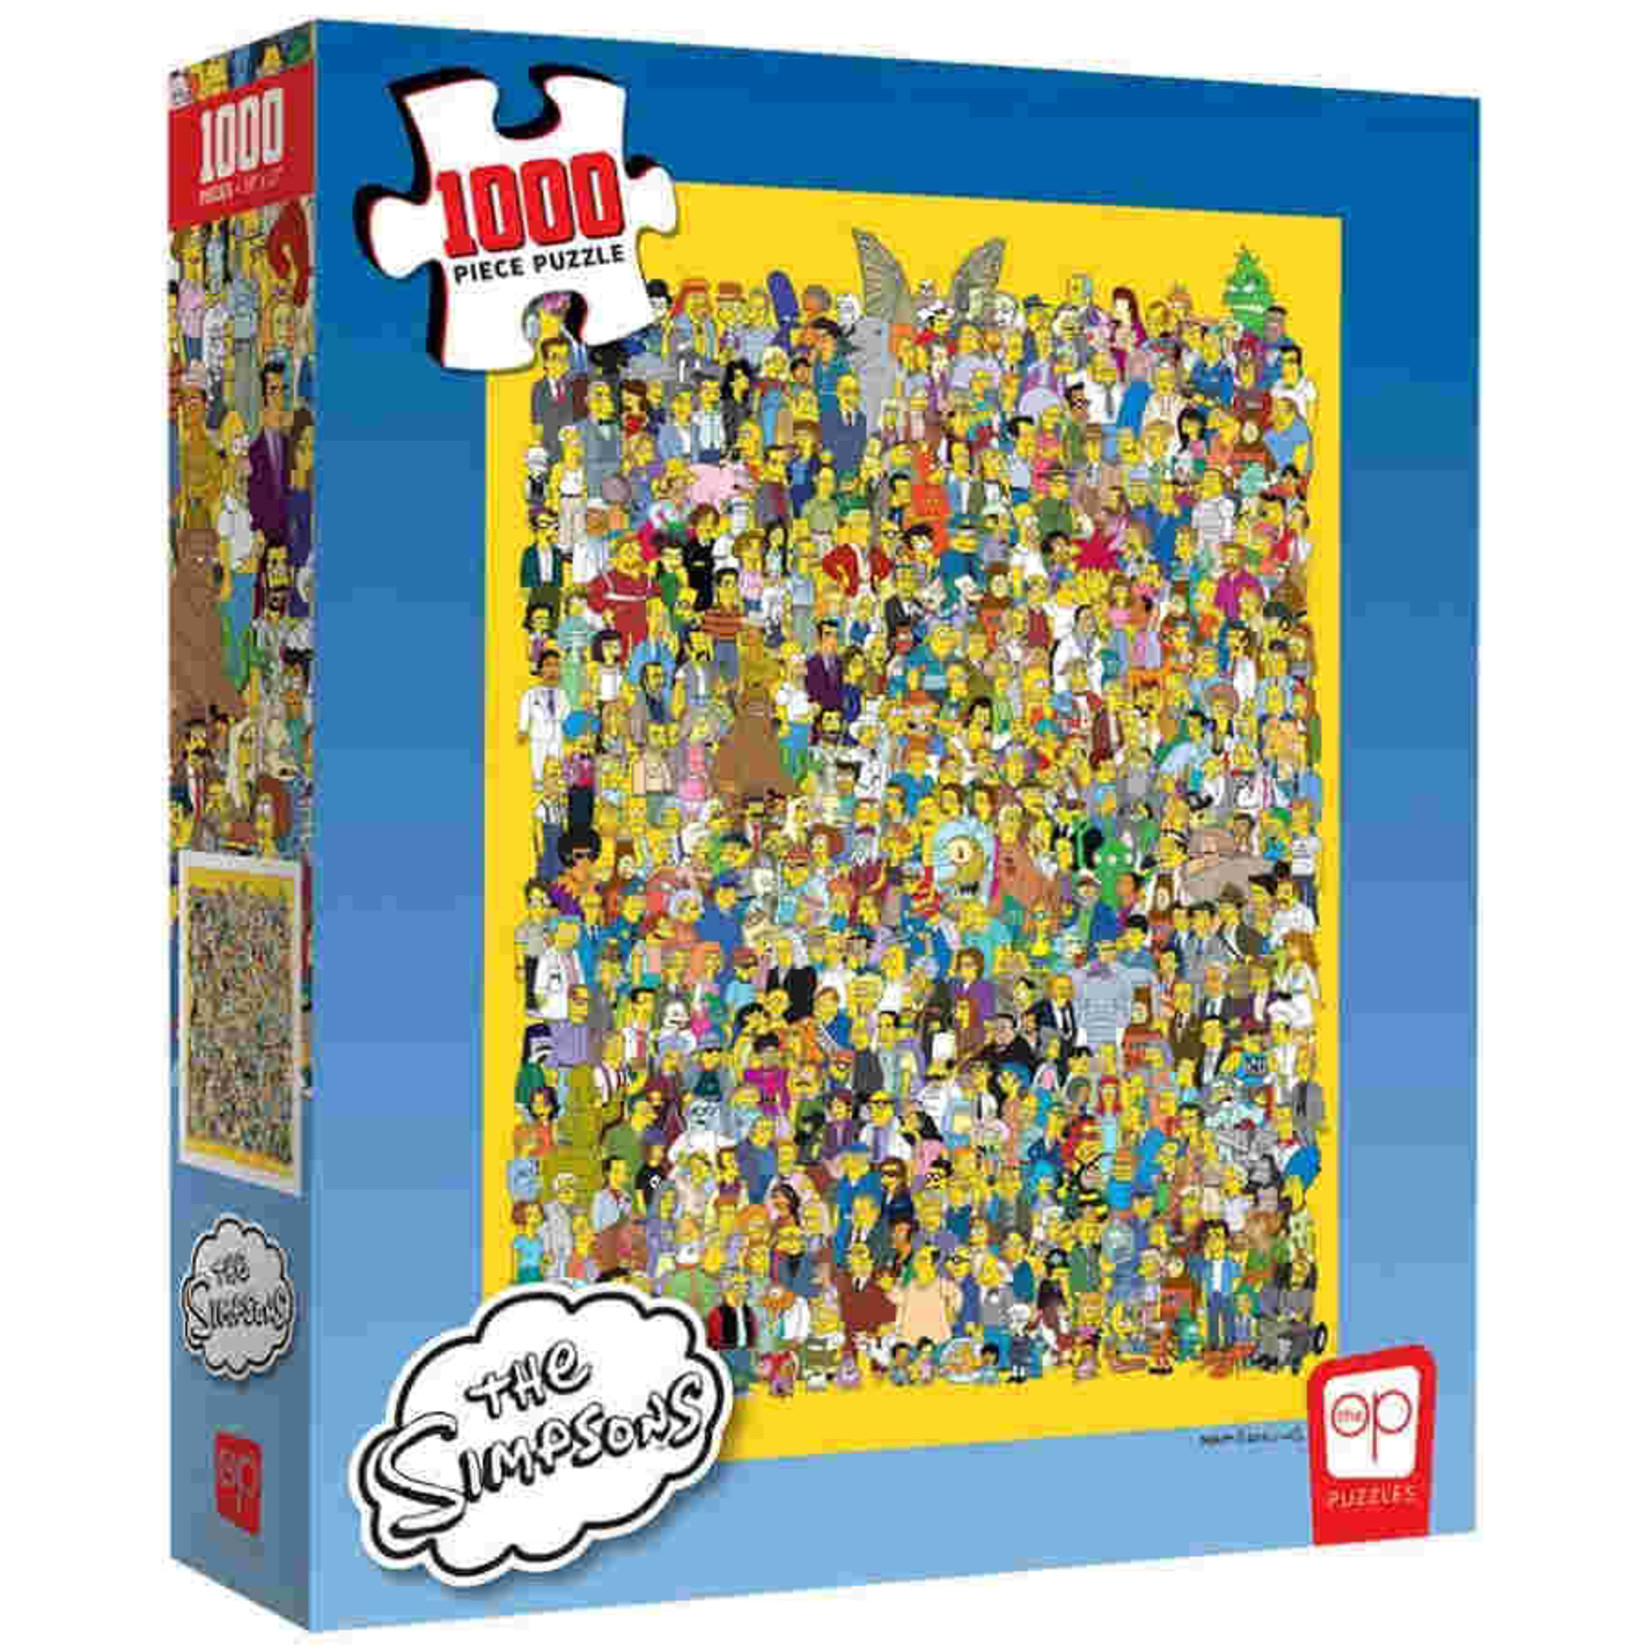 USAOpoly Puzzle The Simpsons Cast of Thousands 1000pc